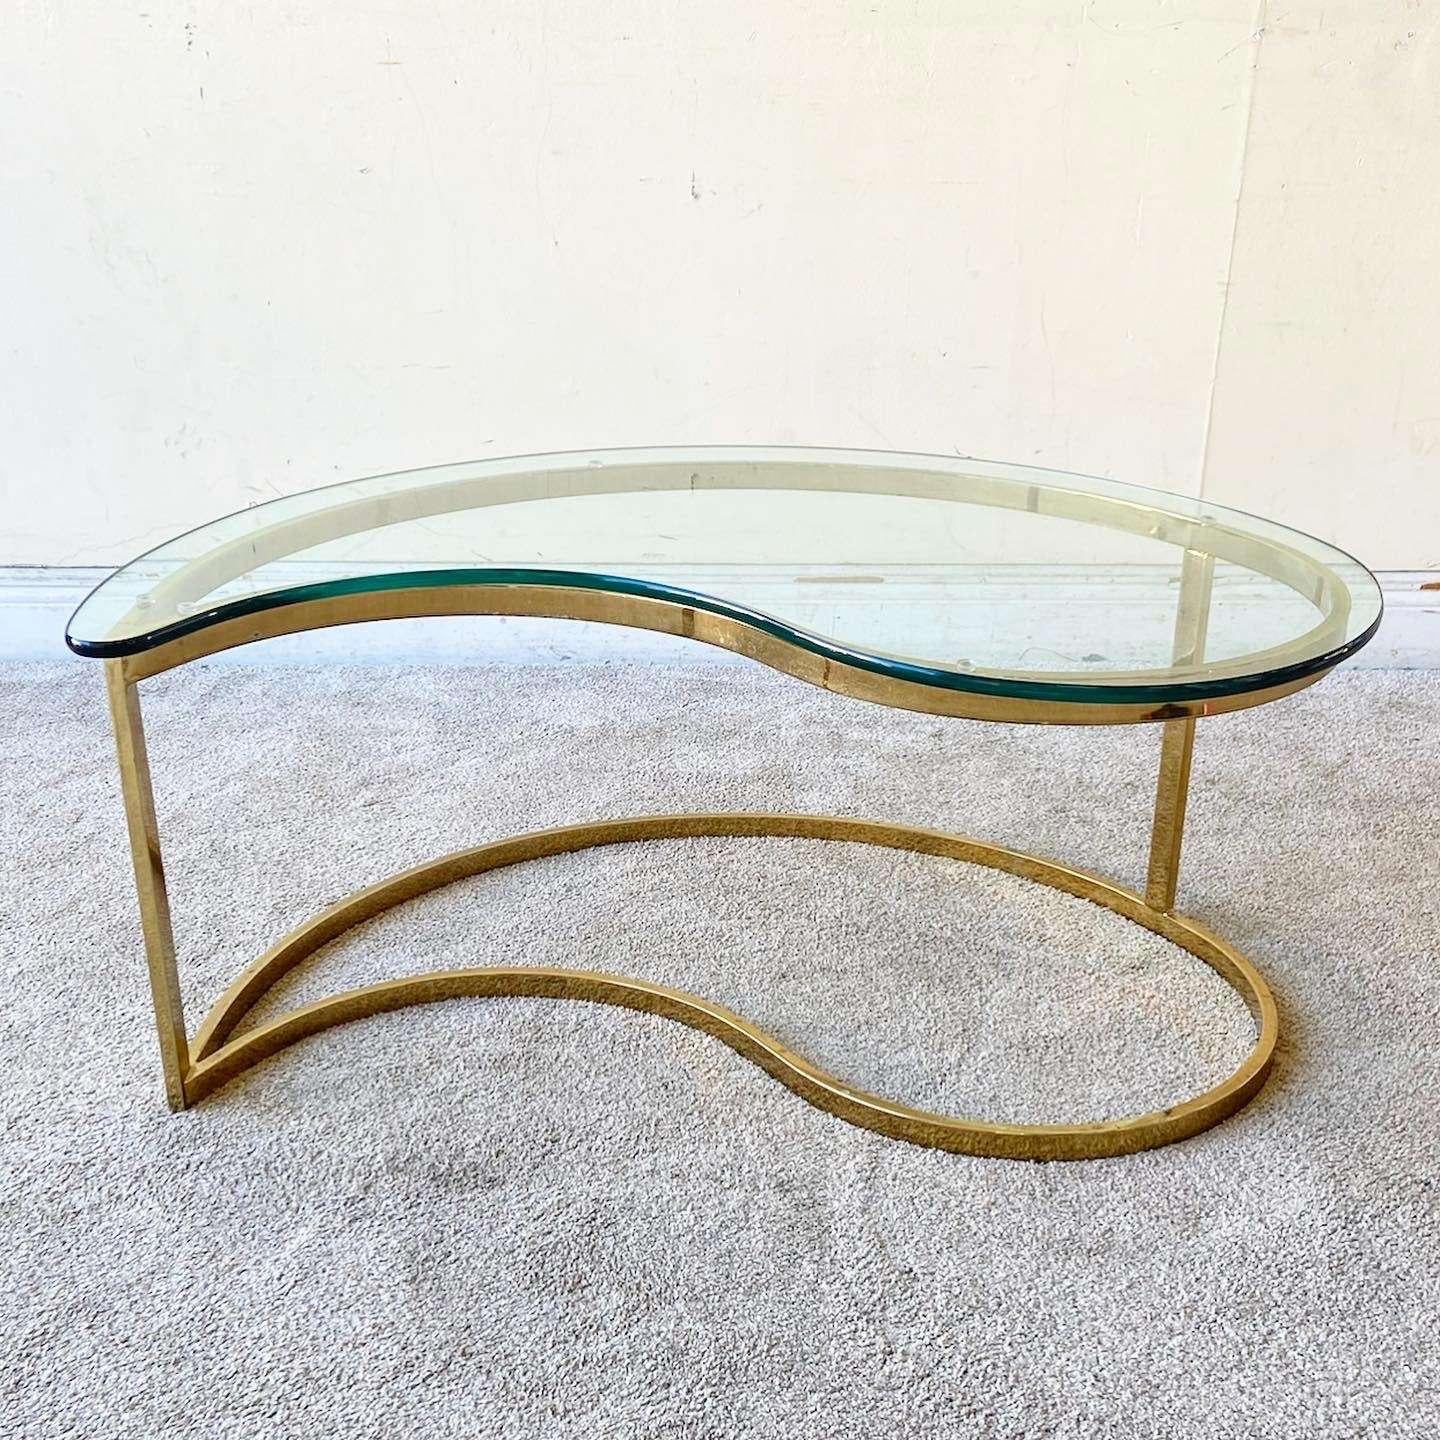 Incredible mid century modern/Hollywood regency glass top coffee table. Glass is cut to a fantastic tear drop shape which sits on the sculpted golden finished base.